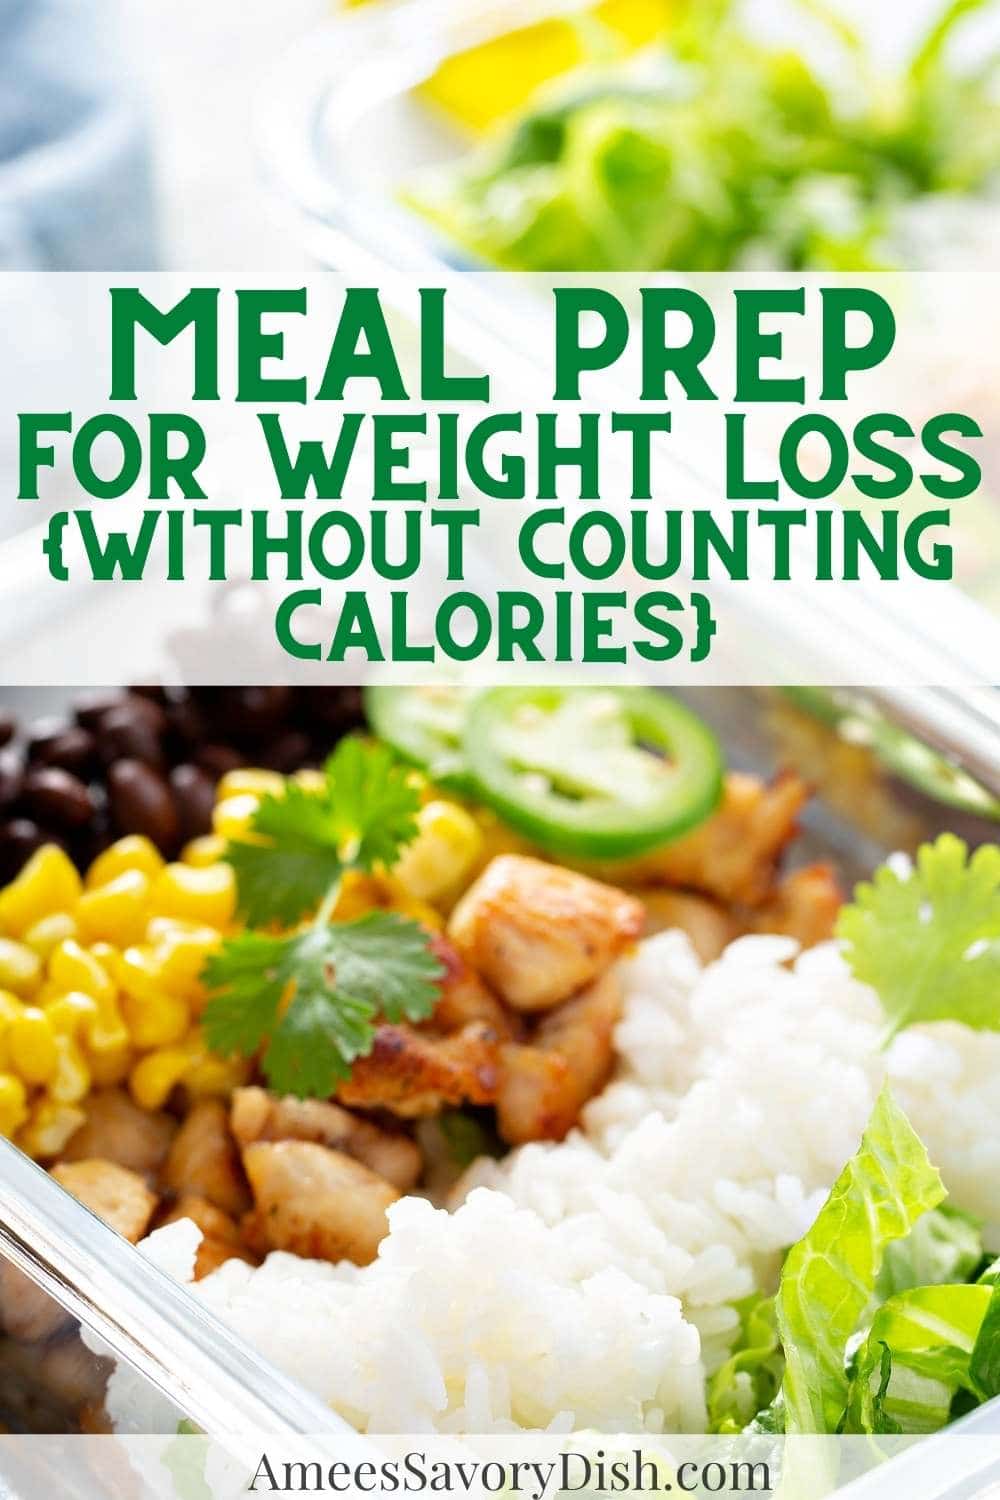 Here you’ll find simple and practical tips to meal prep for weight loss without counting calories. The key to meal prep is making it easy enough to do week after week and preparing nutritious meals that you actually enjoy. via @Ameessavorydish